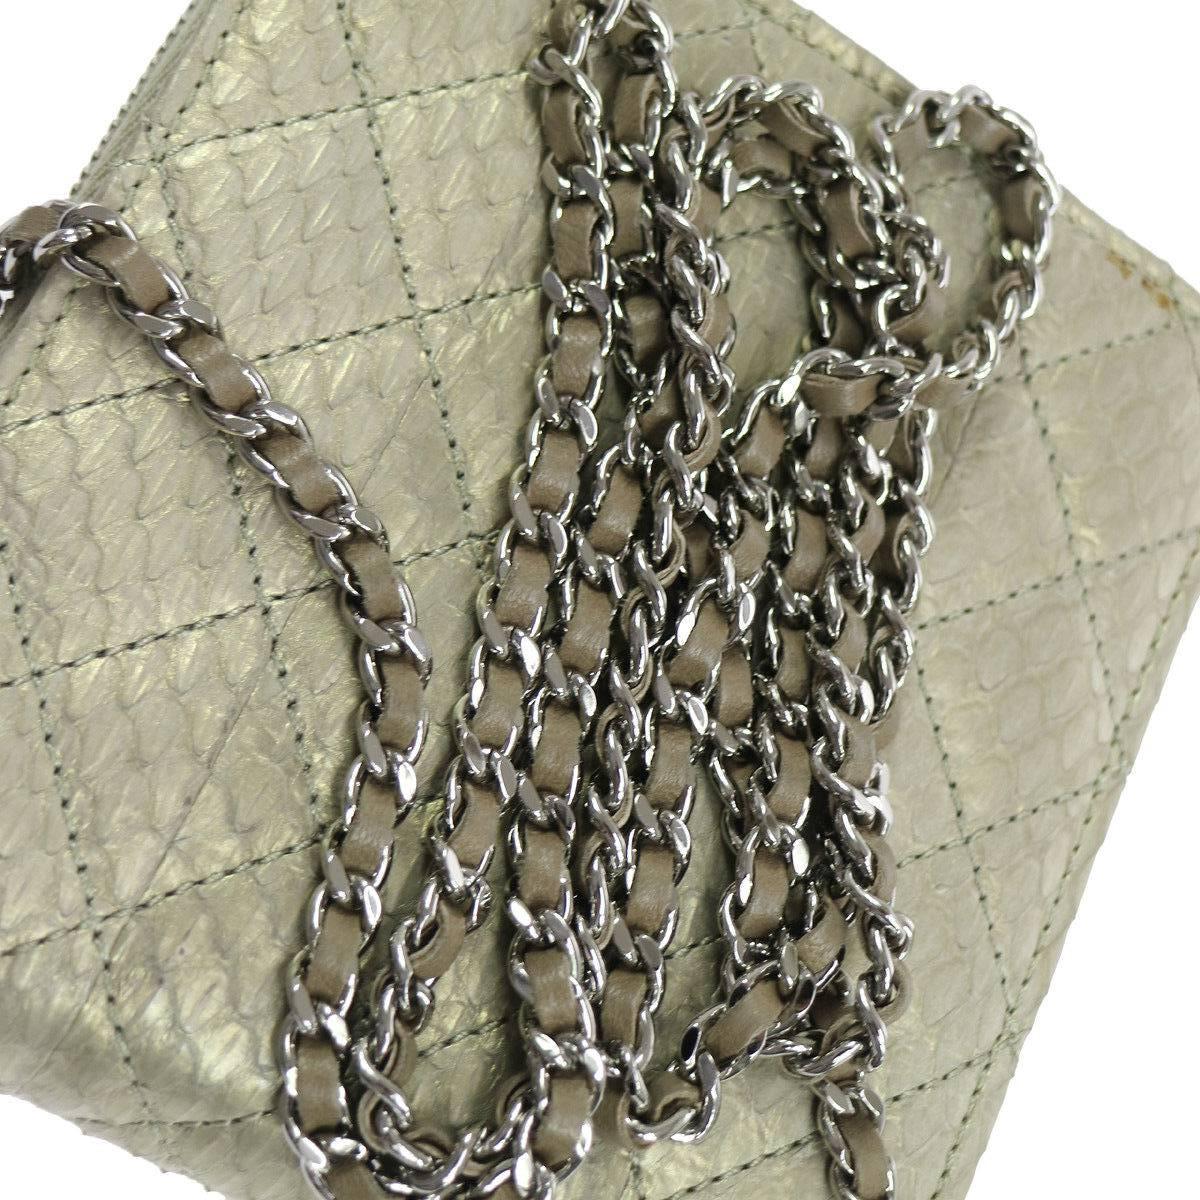 Chanel Python Metallic Iridescent Evening Wallet on Chain WOC Crossbody Shoulder Flap Bag

Python
Leather 
Silver tone hardware
Turnlock closure
Leather lining
Made in Italy
Date code present
Shoulder strap drop 27"
Measures 5.5" W x